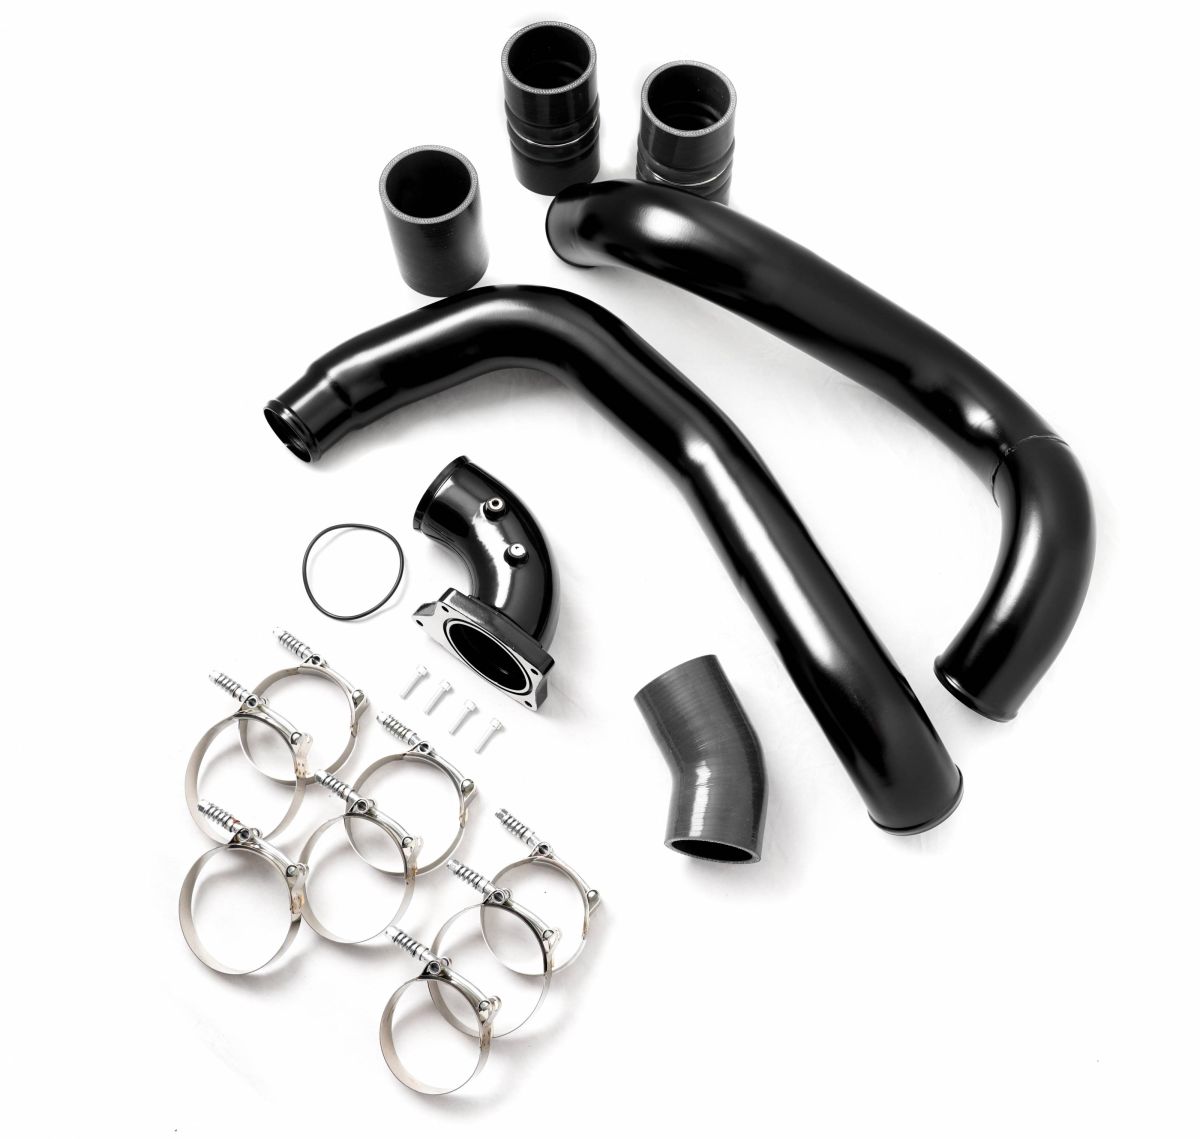 Rudy's Performance Parts - Rudy's Black Intercooler Pipe & Boot Kit w/ High Flow Intake Elbow For 05-07 6.0 Powerstroke